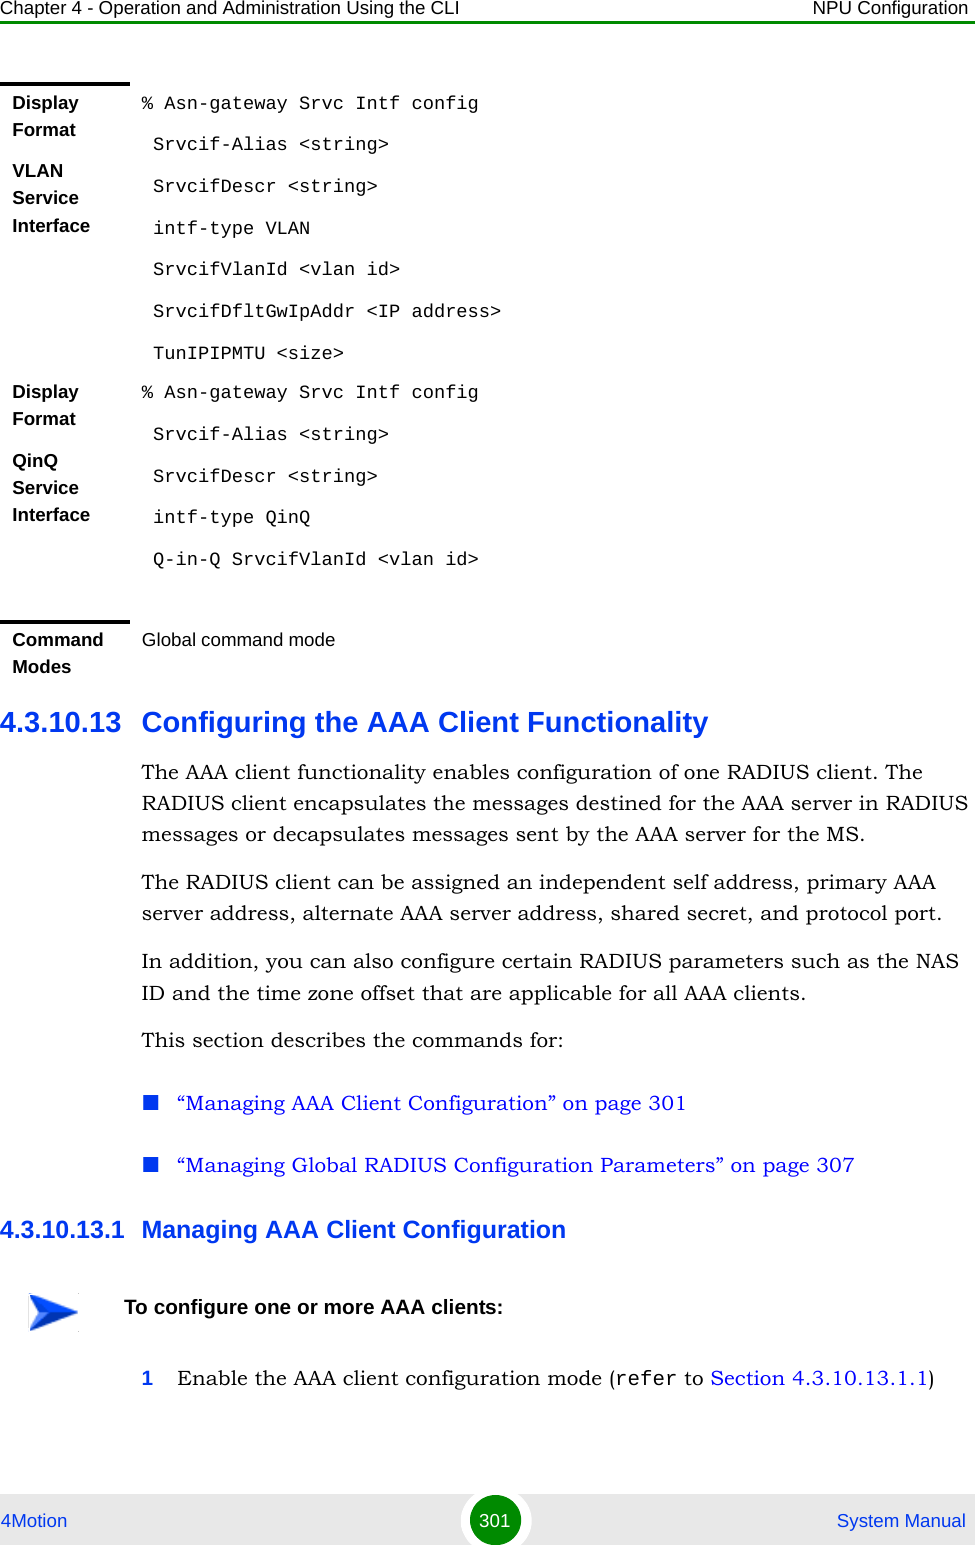 Chapter 4 - Operation and Administration Using the CLI NPU Configuration4Motion 301  System Manual4.3.10.13 Configuring the AAA Client FunctionalityThe AAA client functionality enables configuration of one RADIUS client. The RADIUS client encapsulates the messages destined for the AAA server in RADIUS messages or decapsulates messages sent by the AAA server for the MS. The RADIUS client can be assigned an independent self address, primary AAA server address, alternate AAA server address, shared secret, and protocol port. In addition, you can also configure certain RADIUS parameters such as the NAS ID and the time zone offset that are applicable for all AAA clients.This section describes the commands for:“Managing AAA Client Configuration” on page 301“Managing Global RADIUS Configuration Parameters” on page 3074.3.10.13.1 Managing AAA Client Configuration1Enable the AAA client configuration mode (refer to Section 4.3.10.13.1.1)Display FormatVLAN Service Interface% Asn-gateway Srvc Intf config Srvcif-Alias &lt;string&gt; SrvcifDescr &lt;string&gt; intf-type VLAN SrvcifVlanId &lt;vlan id&gt; SrvcifDfltGwIpAddr &lt;IP address&gt; TunIPIPMTU &lt;size&gt;Display FormatQinQ Service Interface% Asn-gateway Srvc Intf config Srvcif-Alias &lt;string&gt; SrvcifDescr &lt;string&gt; intf-type QinQ Q-in-Q SrvcifVlanId &lt;vlan id&gt;Command ModesGlobal command modeTo configure one or more AAA clients: